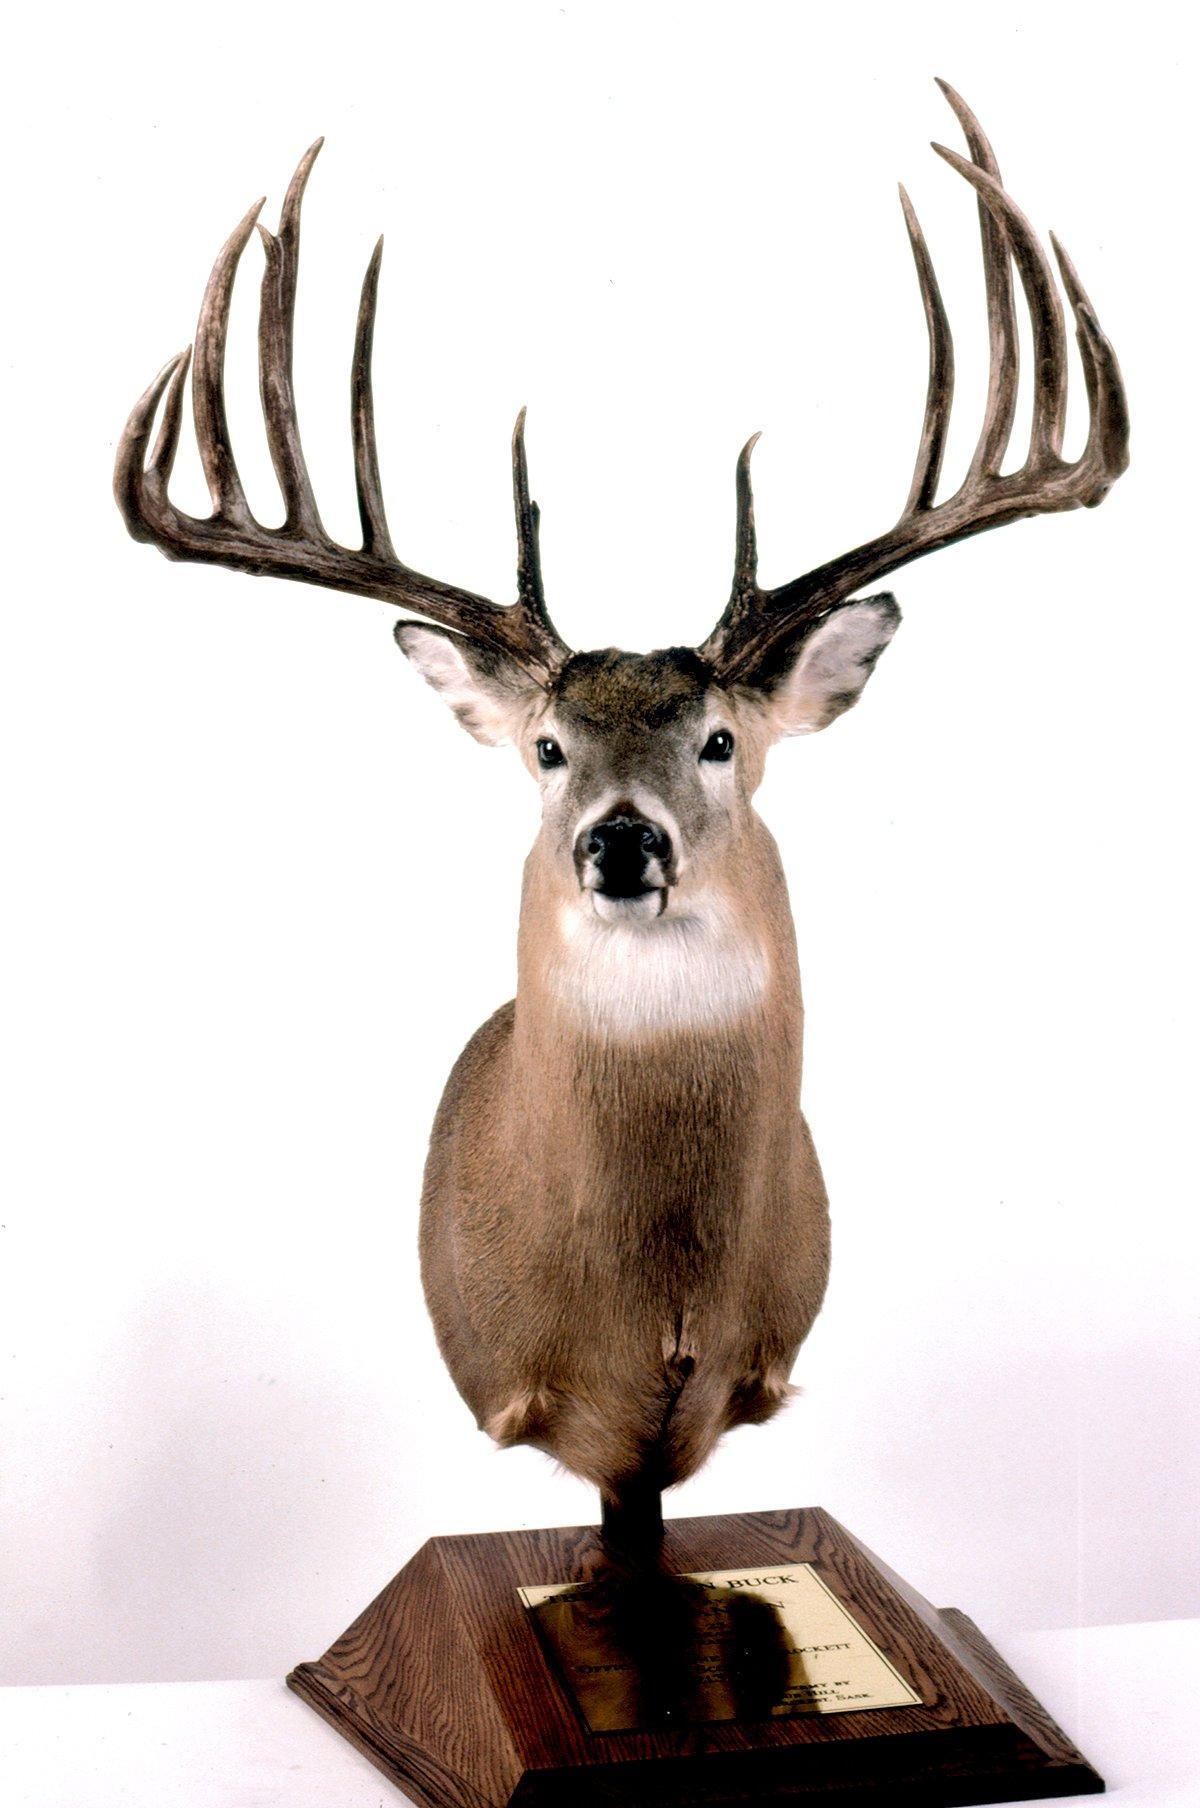 Here's the Hanson Buck on display. Image courtesy of the Boone and Crockett Club